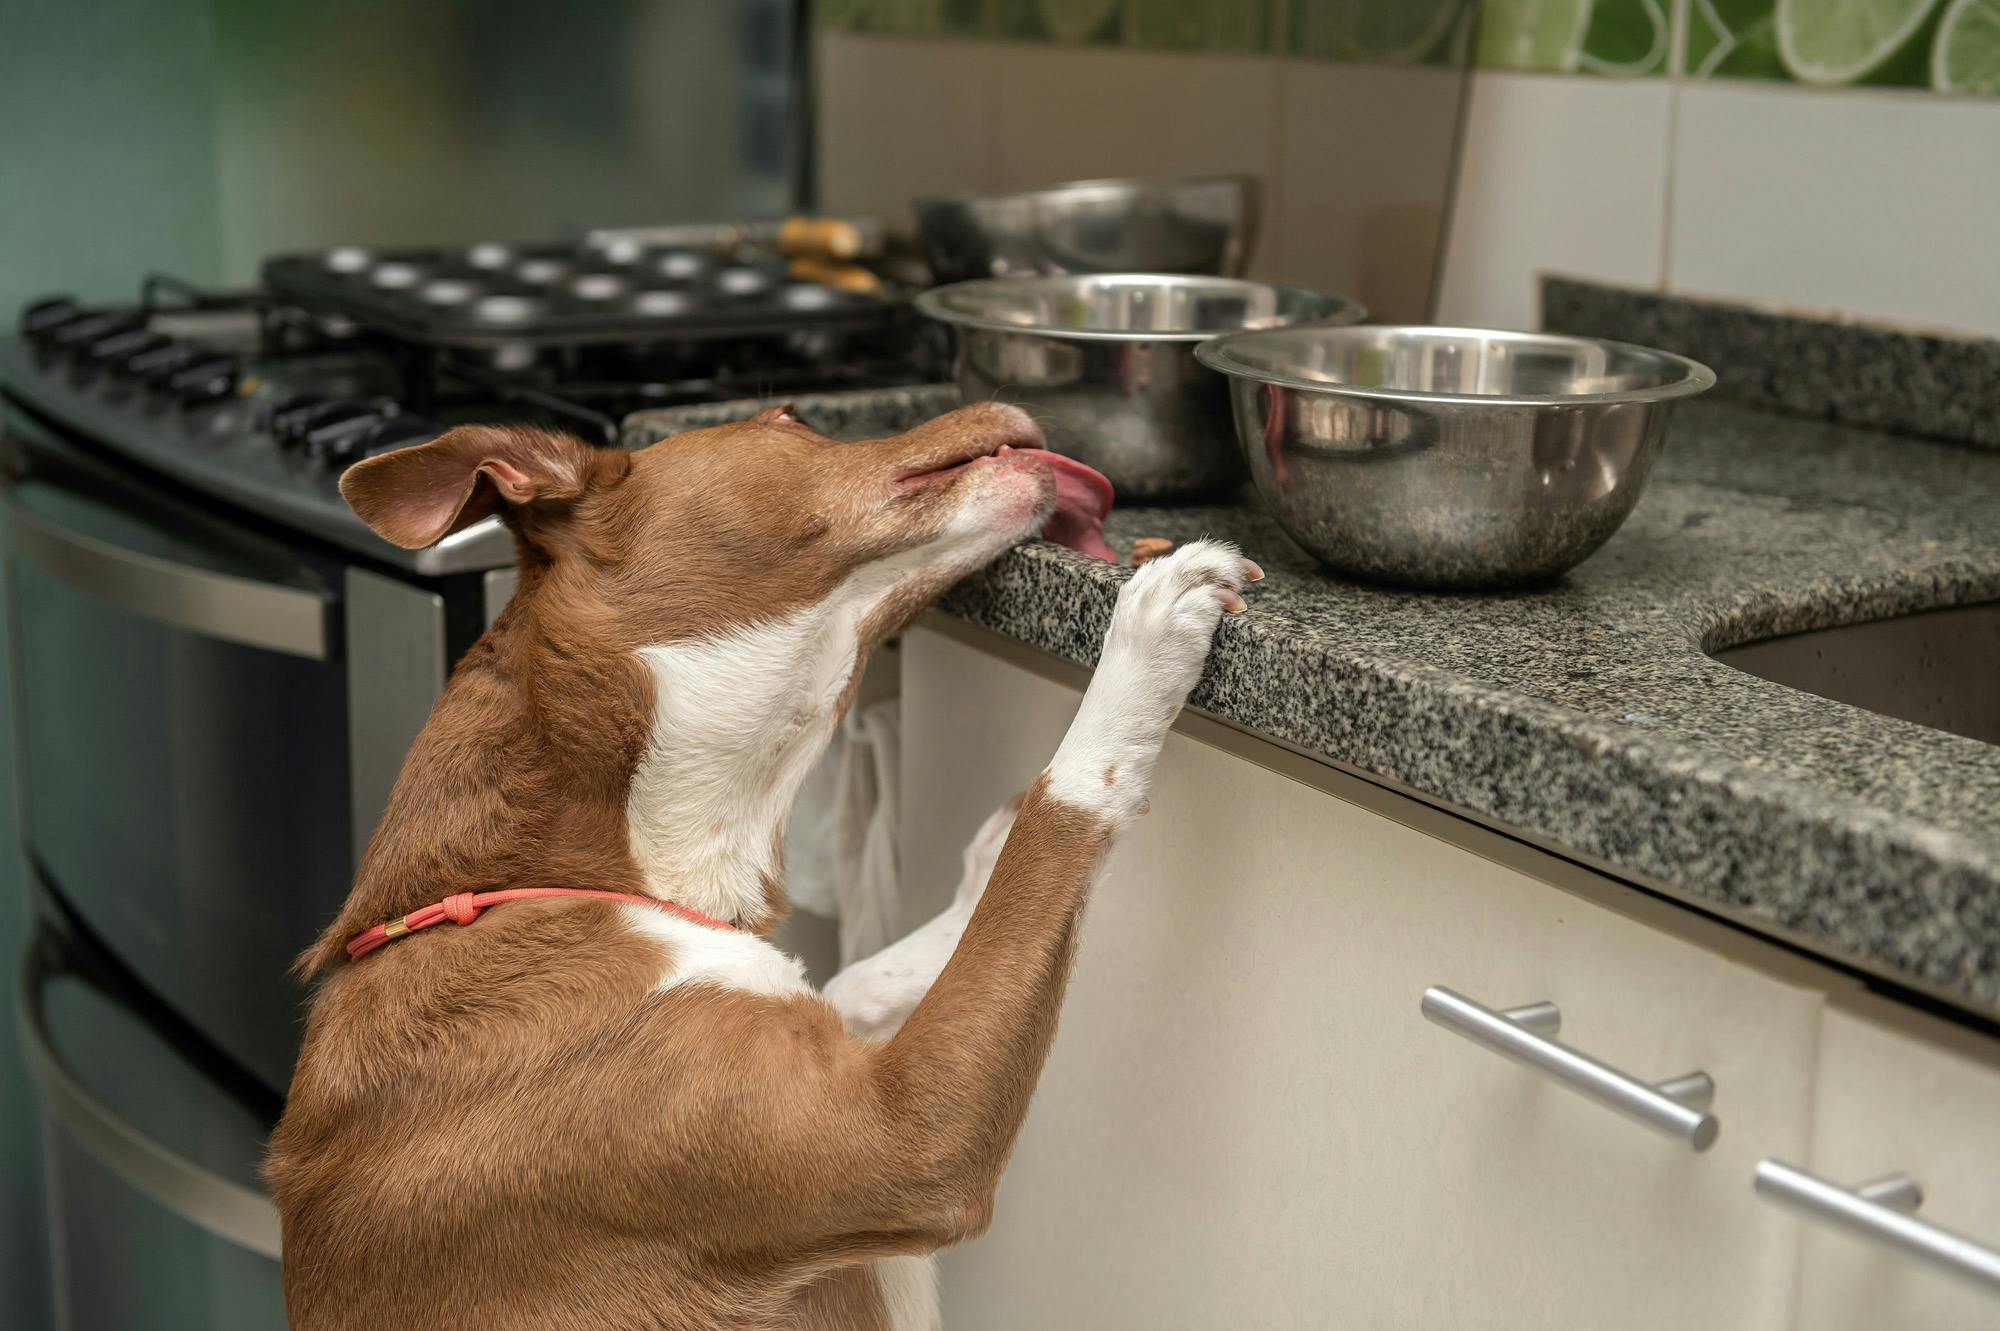 Dog tries to obtain food bowls while counter surfing.